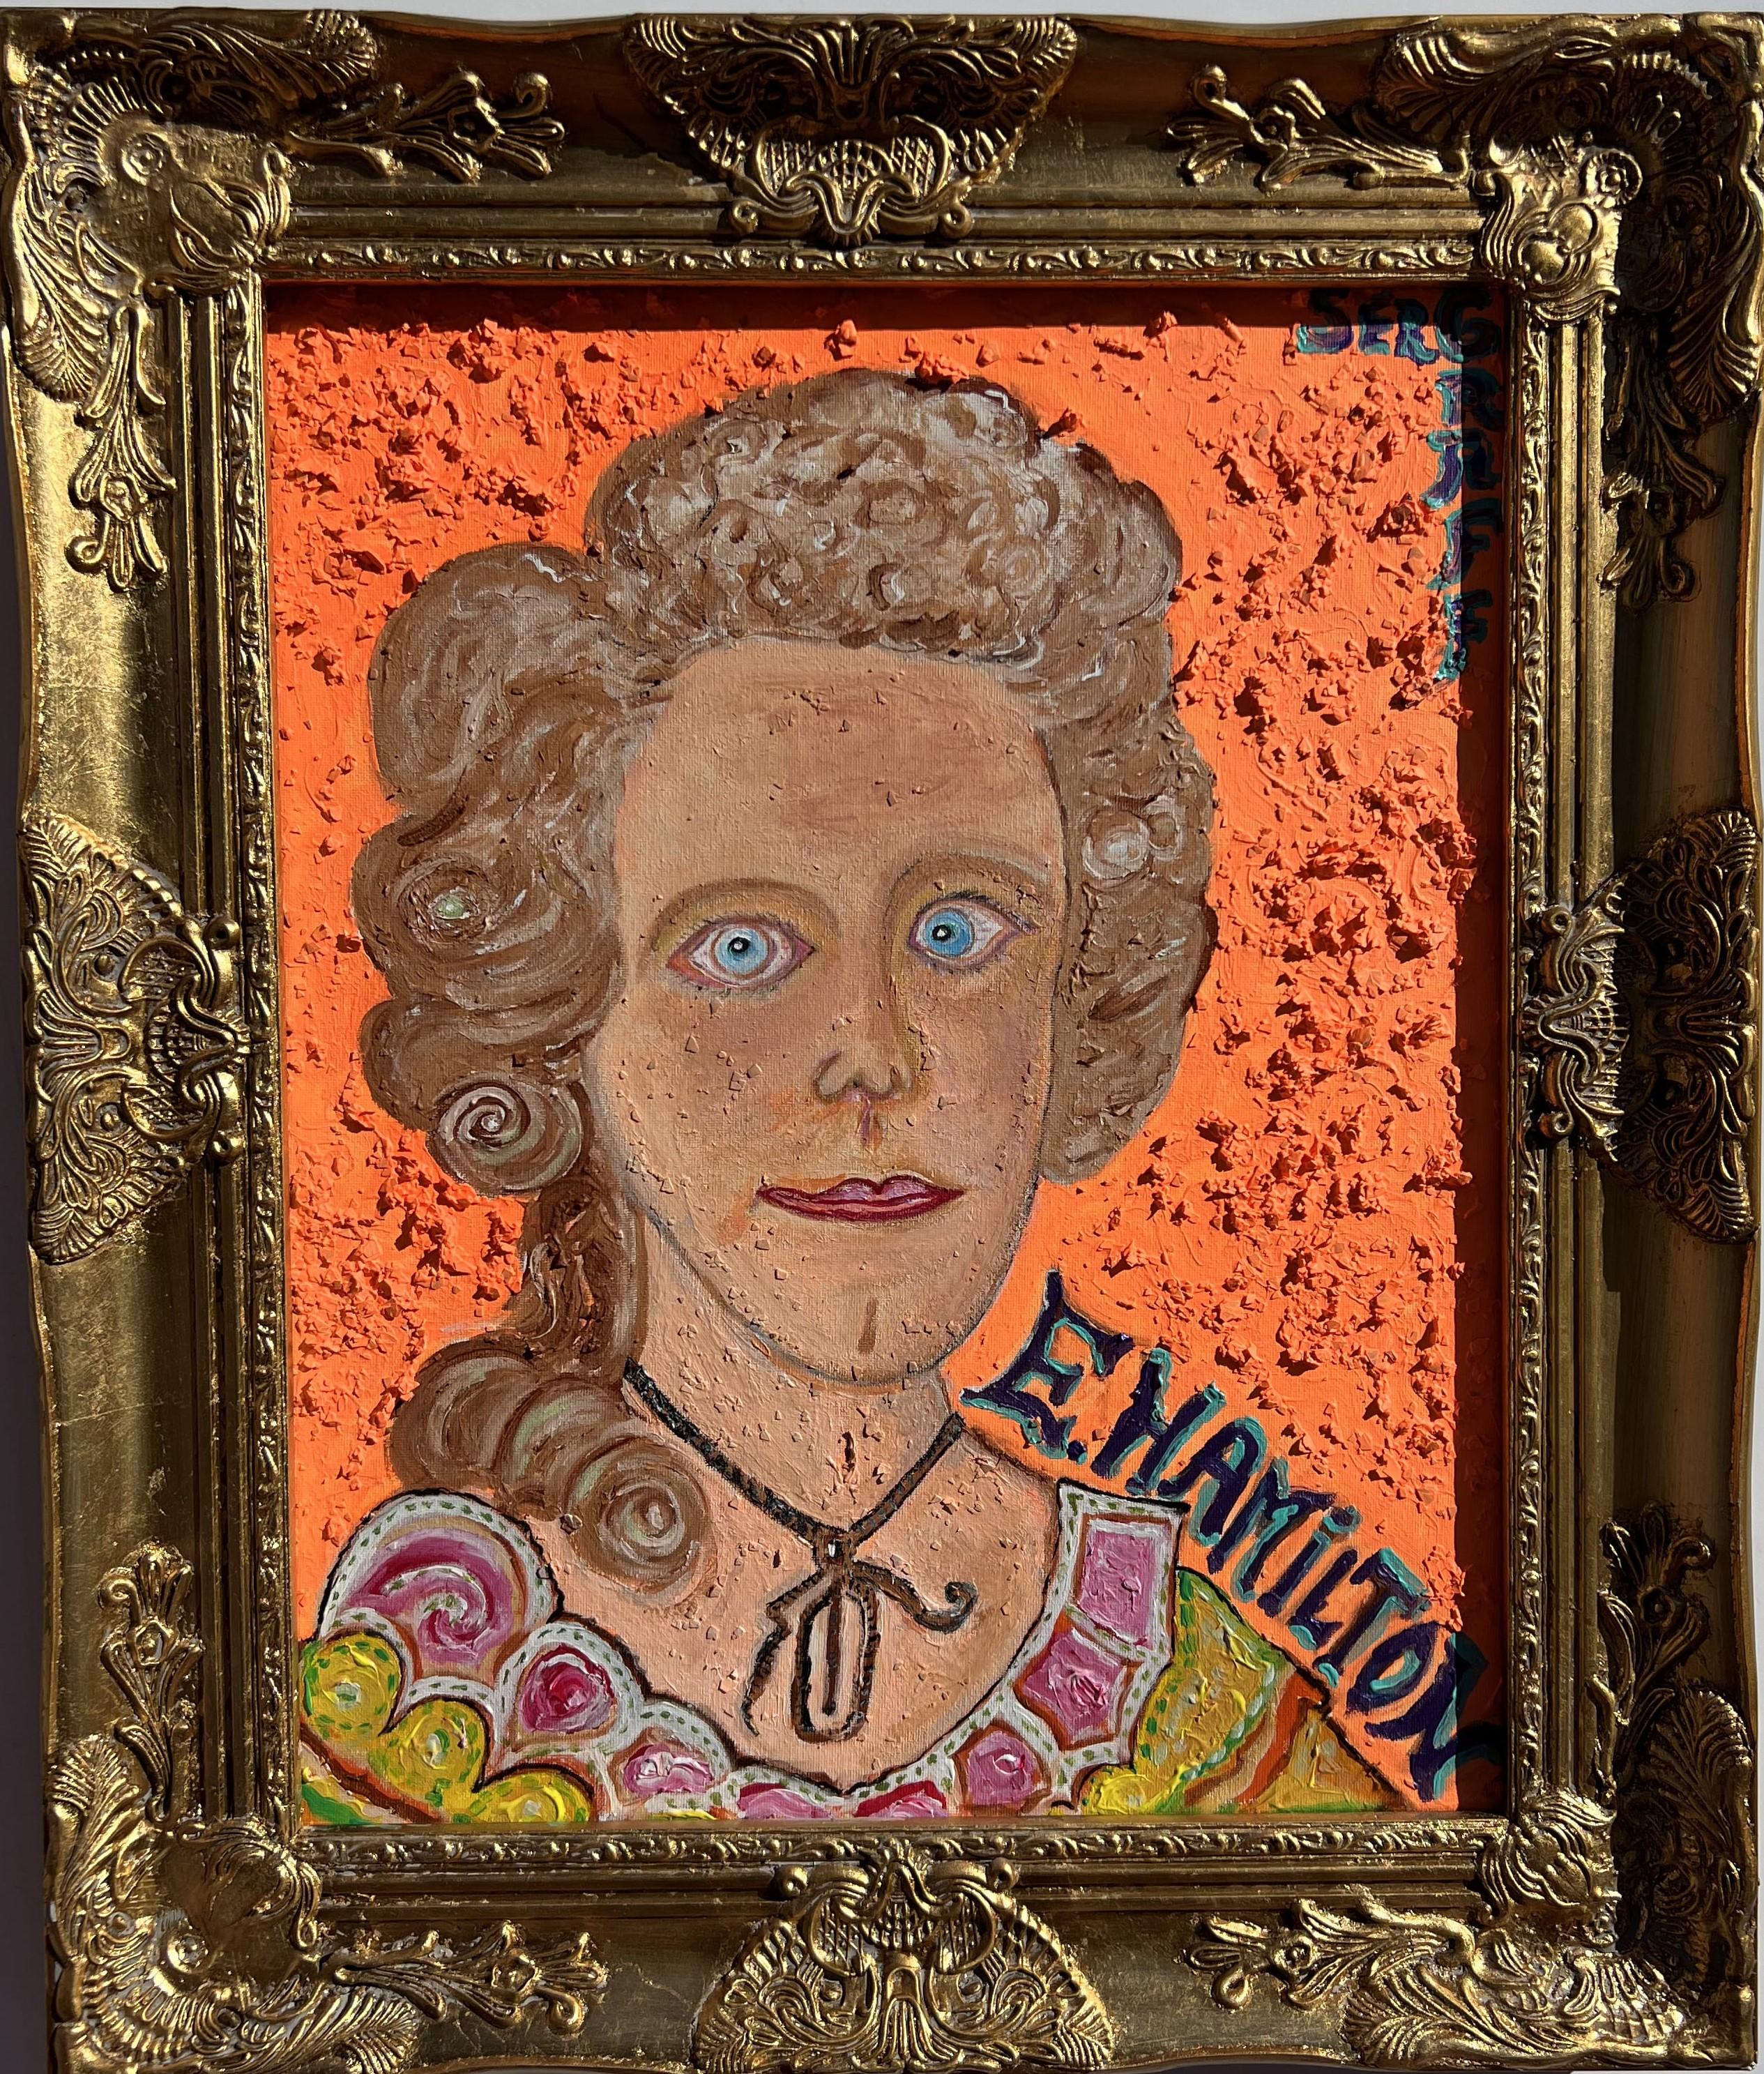 This is a rare unique original acrylic/oil painting on canvas in a naive primitivism style depicting Elizabeth Hamilton (1757-1854) the spouse of Alexander Hamilton (1757-1804) - one of the Founding Fathers of the United States.

Present in an